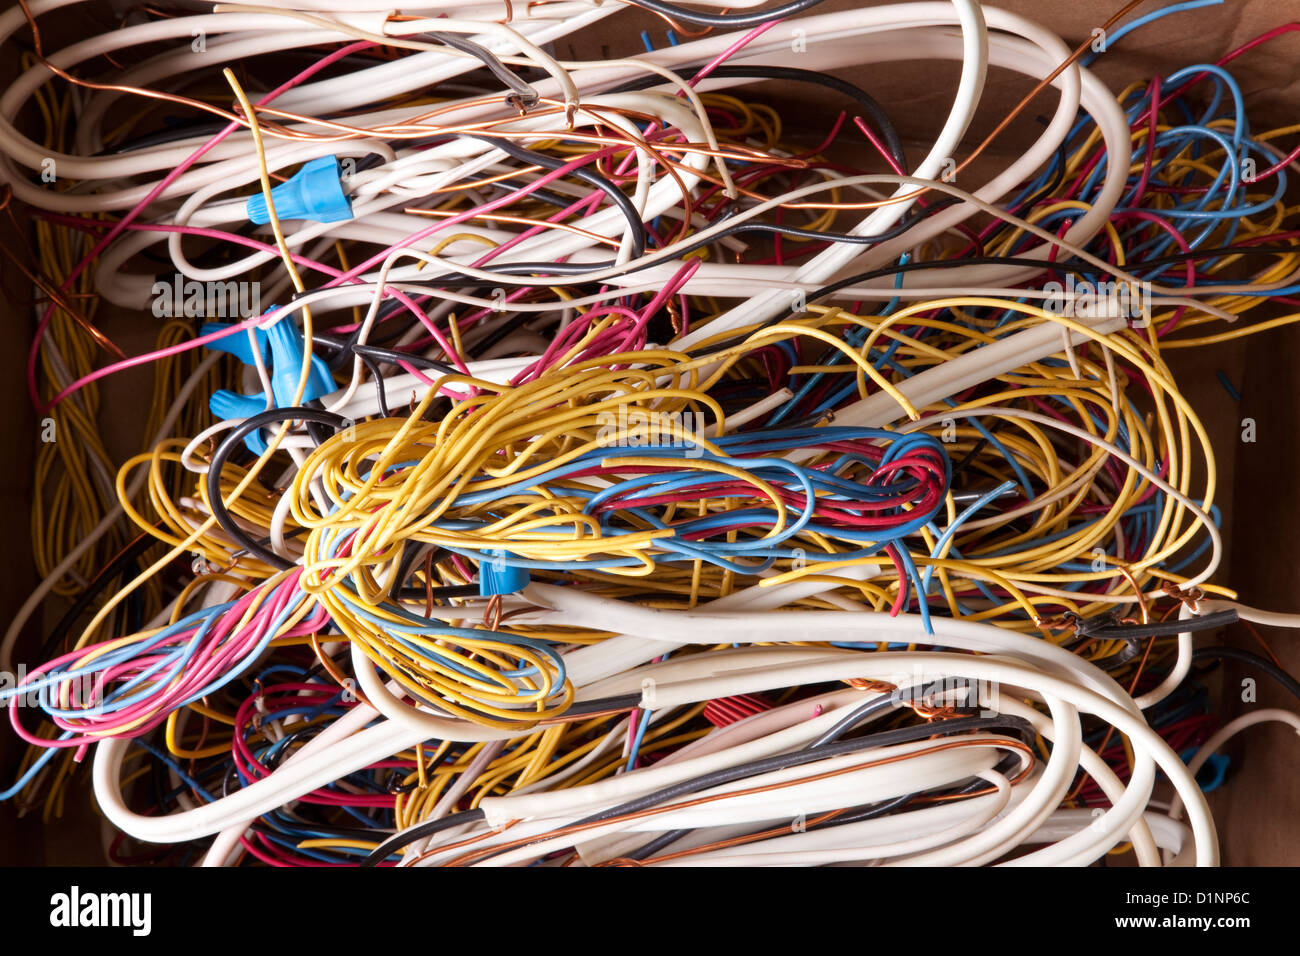 Close-up of view of numerous tangled electrical wires. Stock Photo